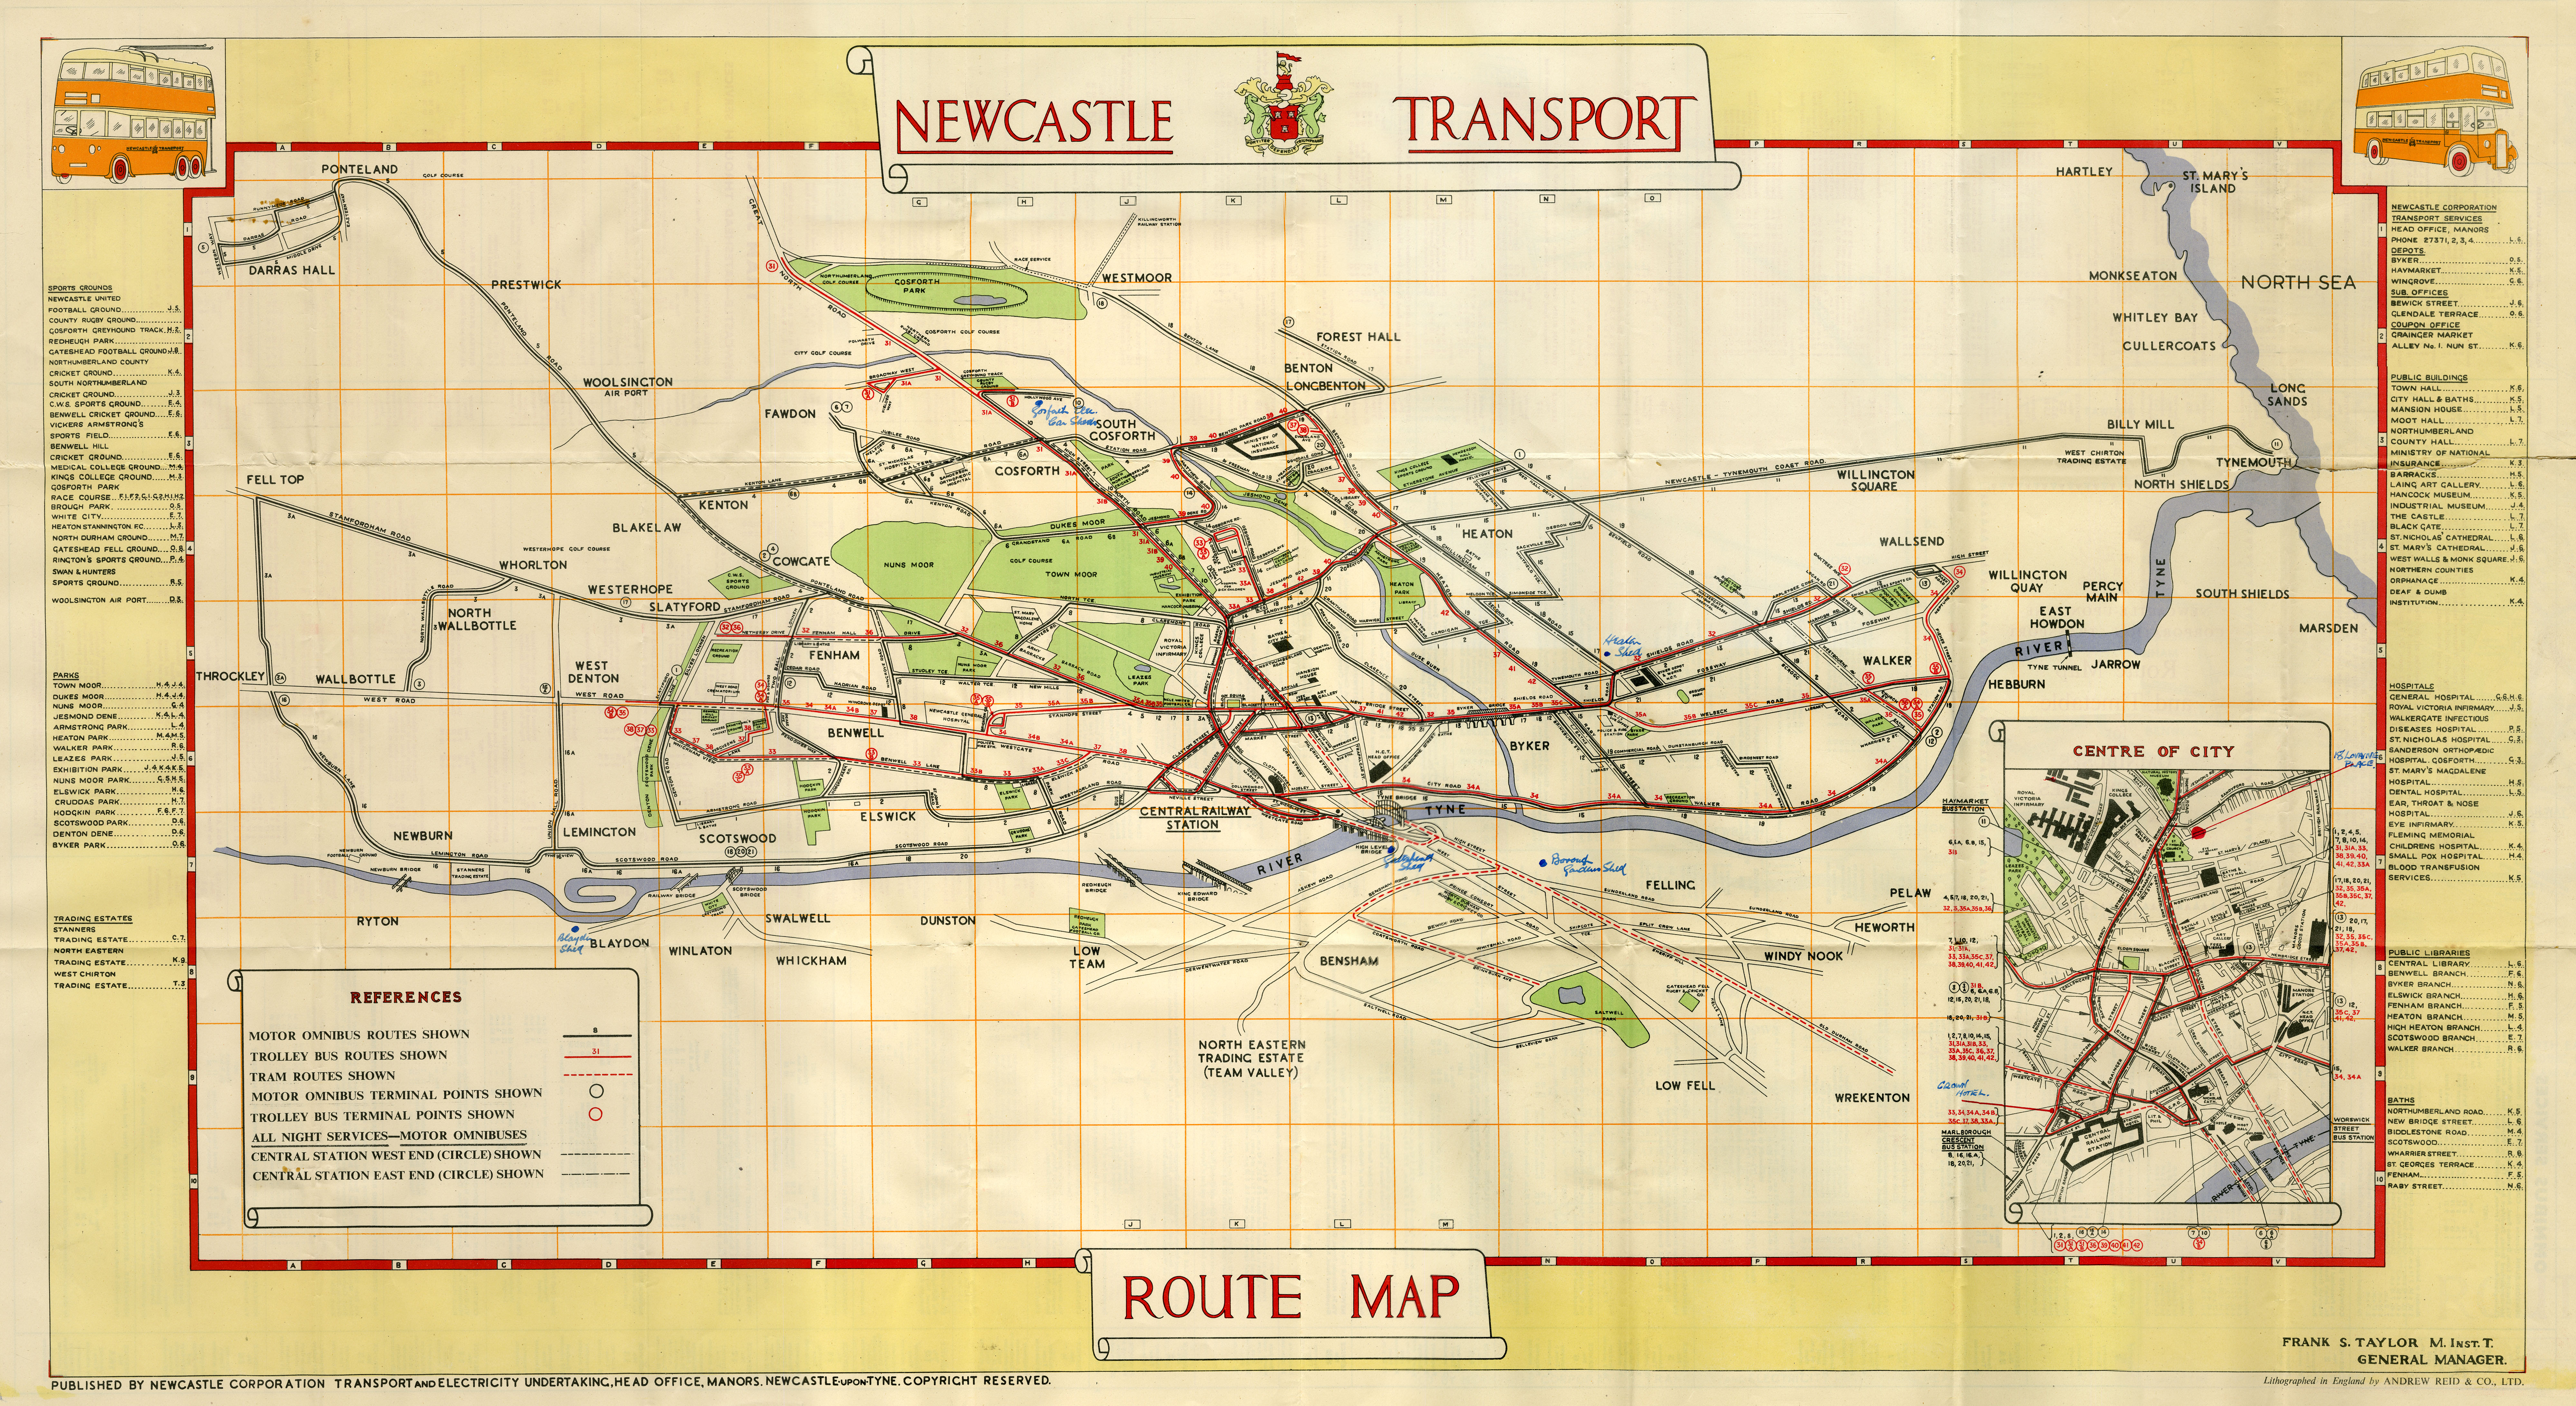 Newcastle-upon-Tyne Corporation transport Route Map & Timetable for Omnibuses, Trolley-buses and Trams. September 1949.